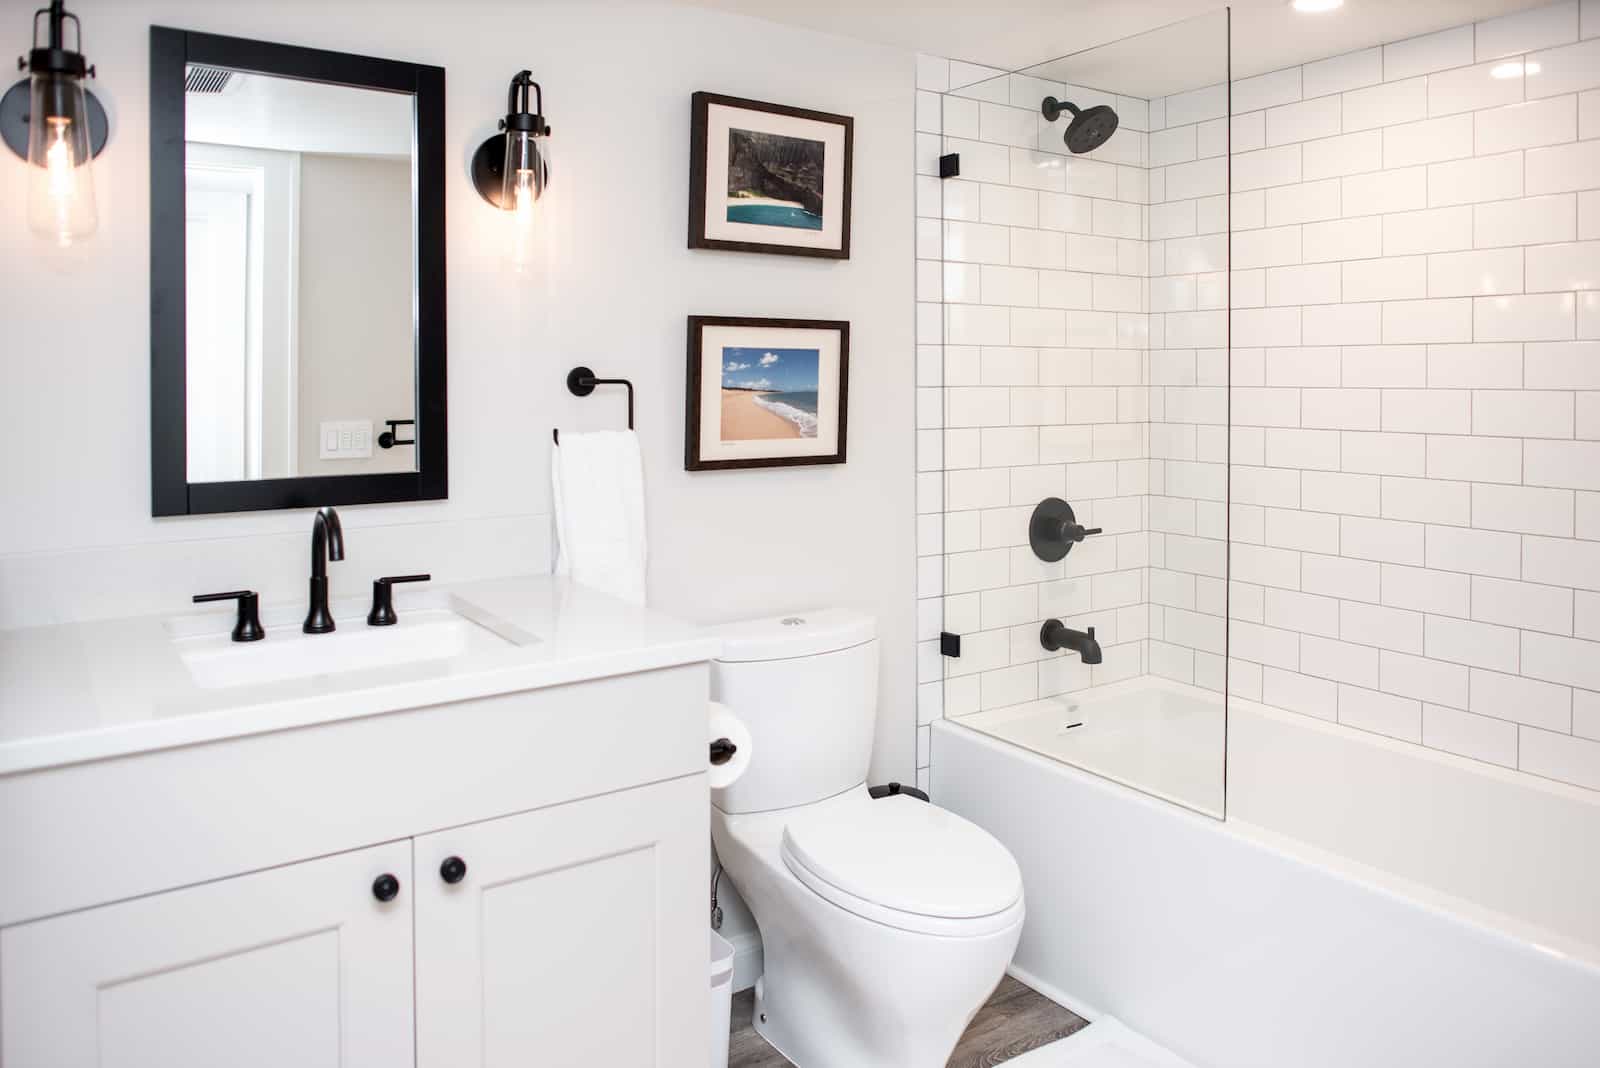 Are Permits Required For A Bathroom Remodel In Seattle